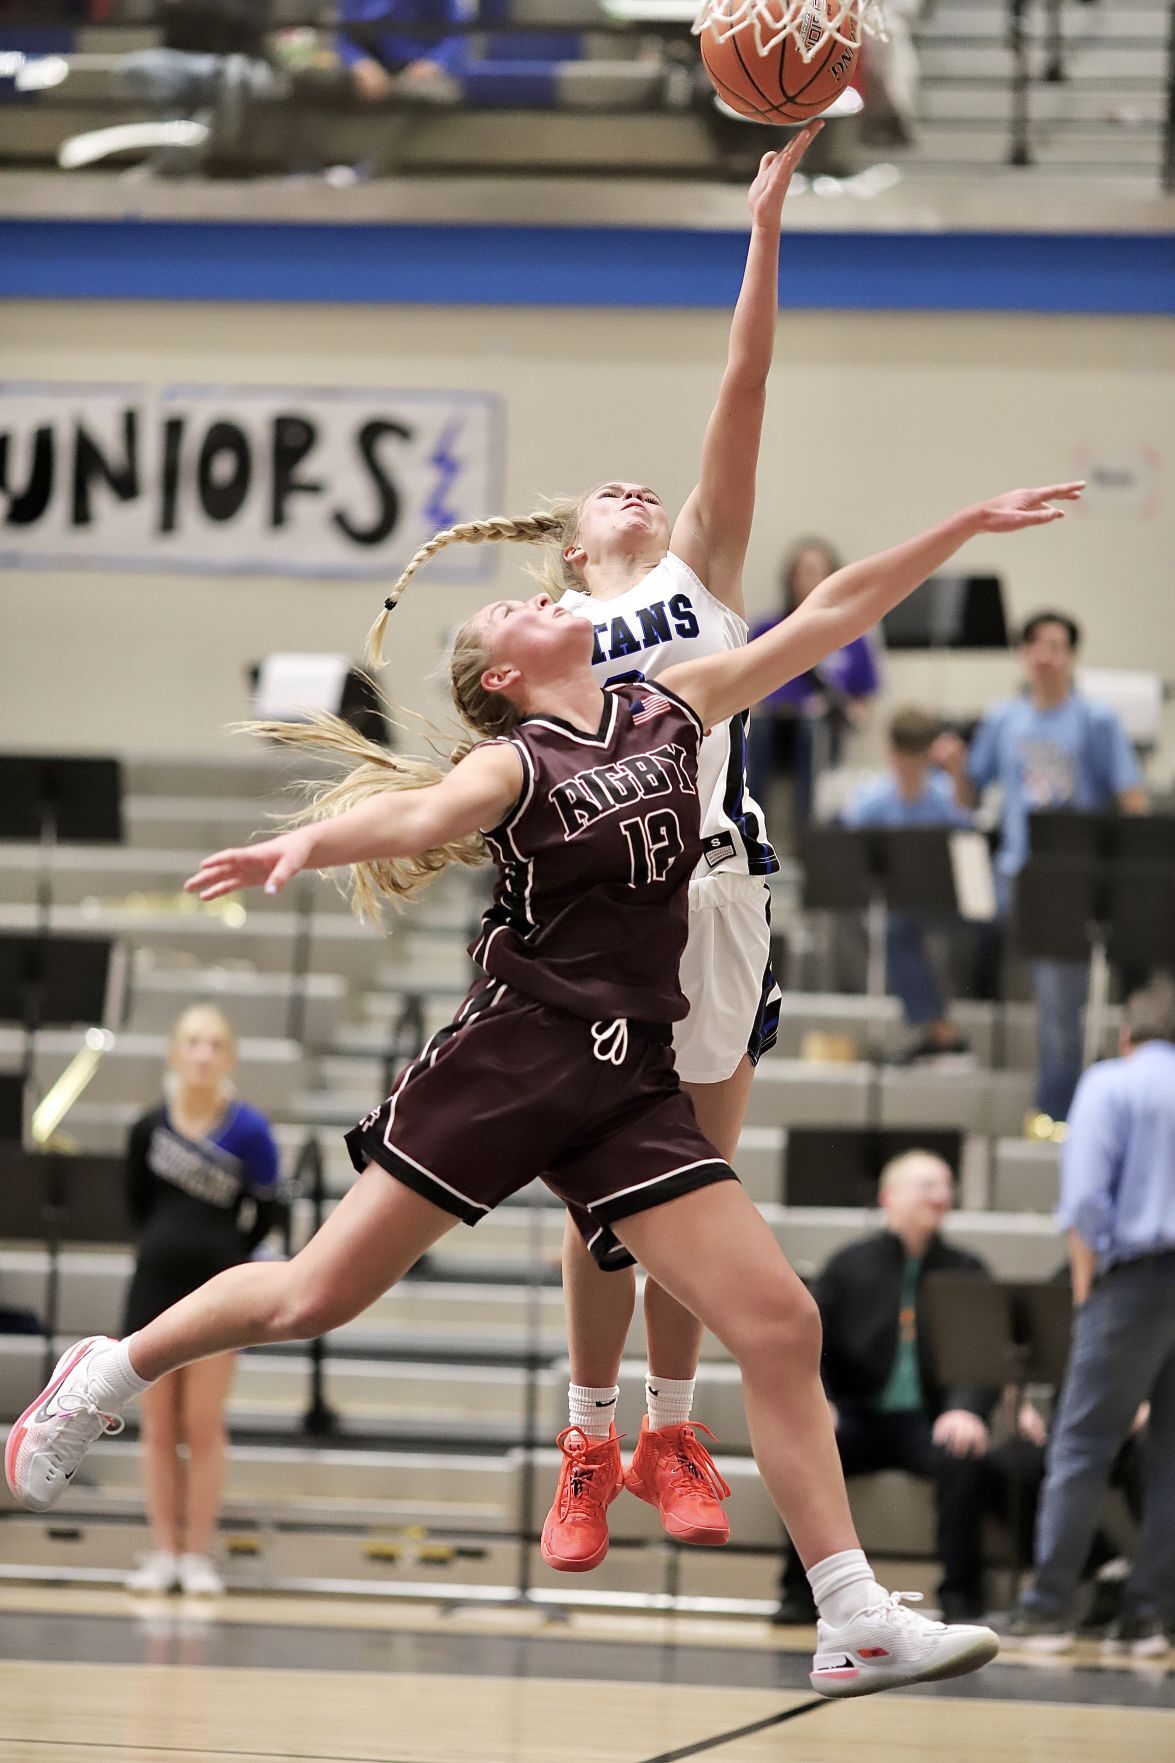 HIGH SCHOOL GIRLS BASKETBALL All-conference lists for 5A, 3A, 2A Postregister postregister